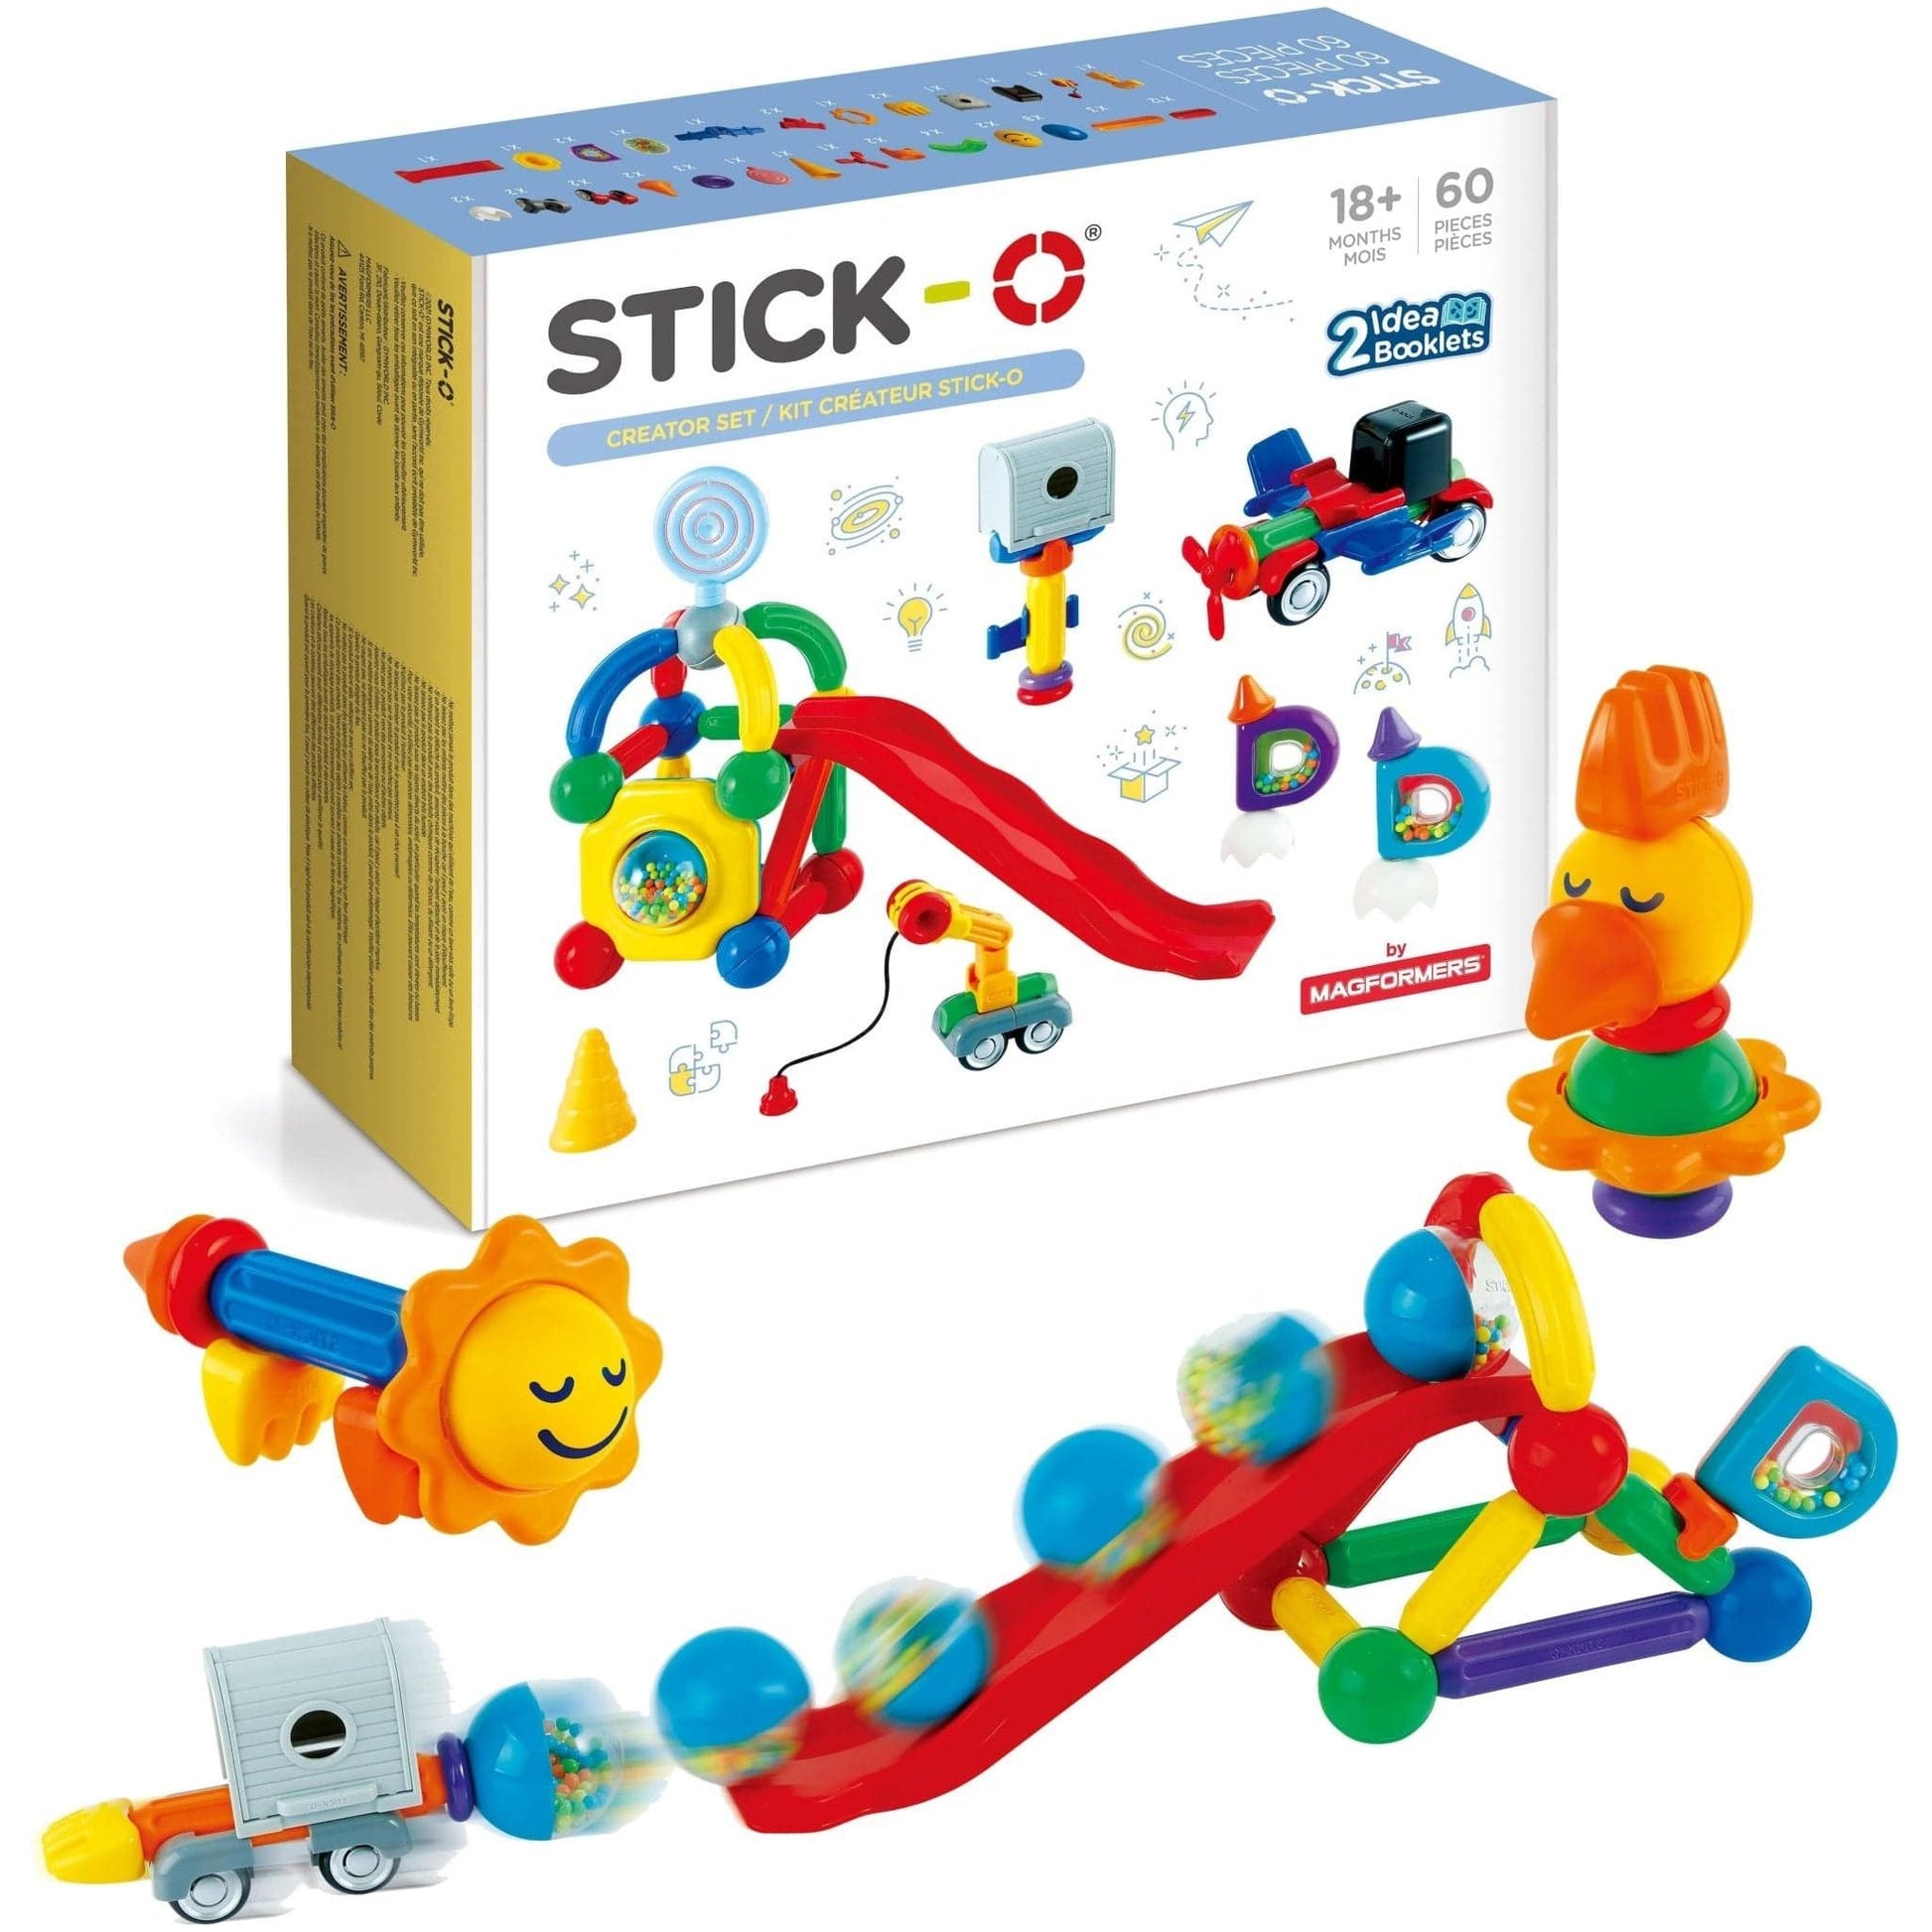 Magformers Stick-O Creator 60 Piece Set front of box with models